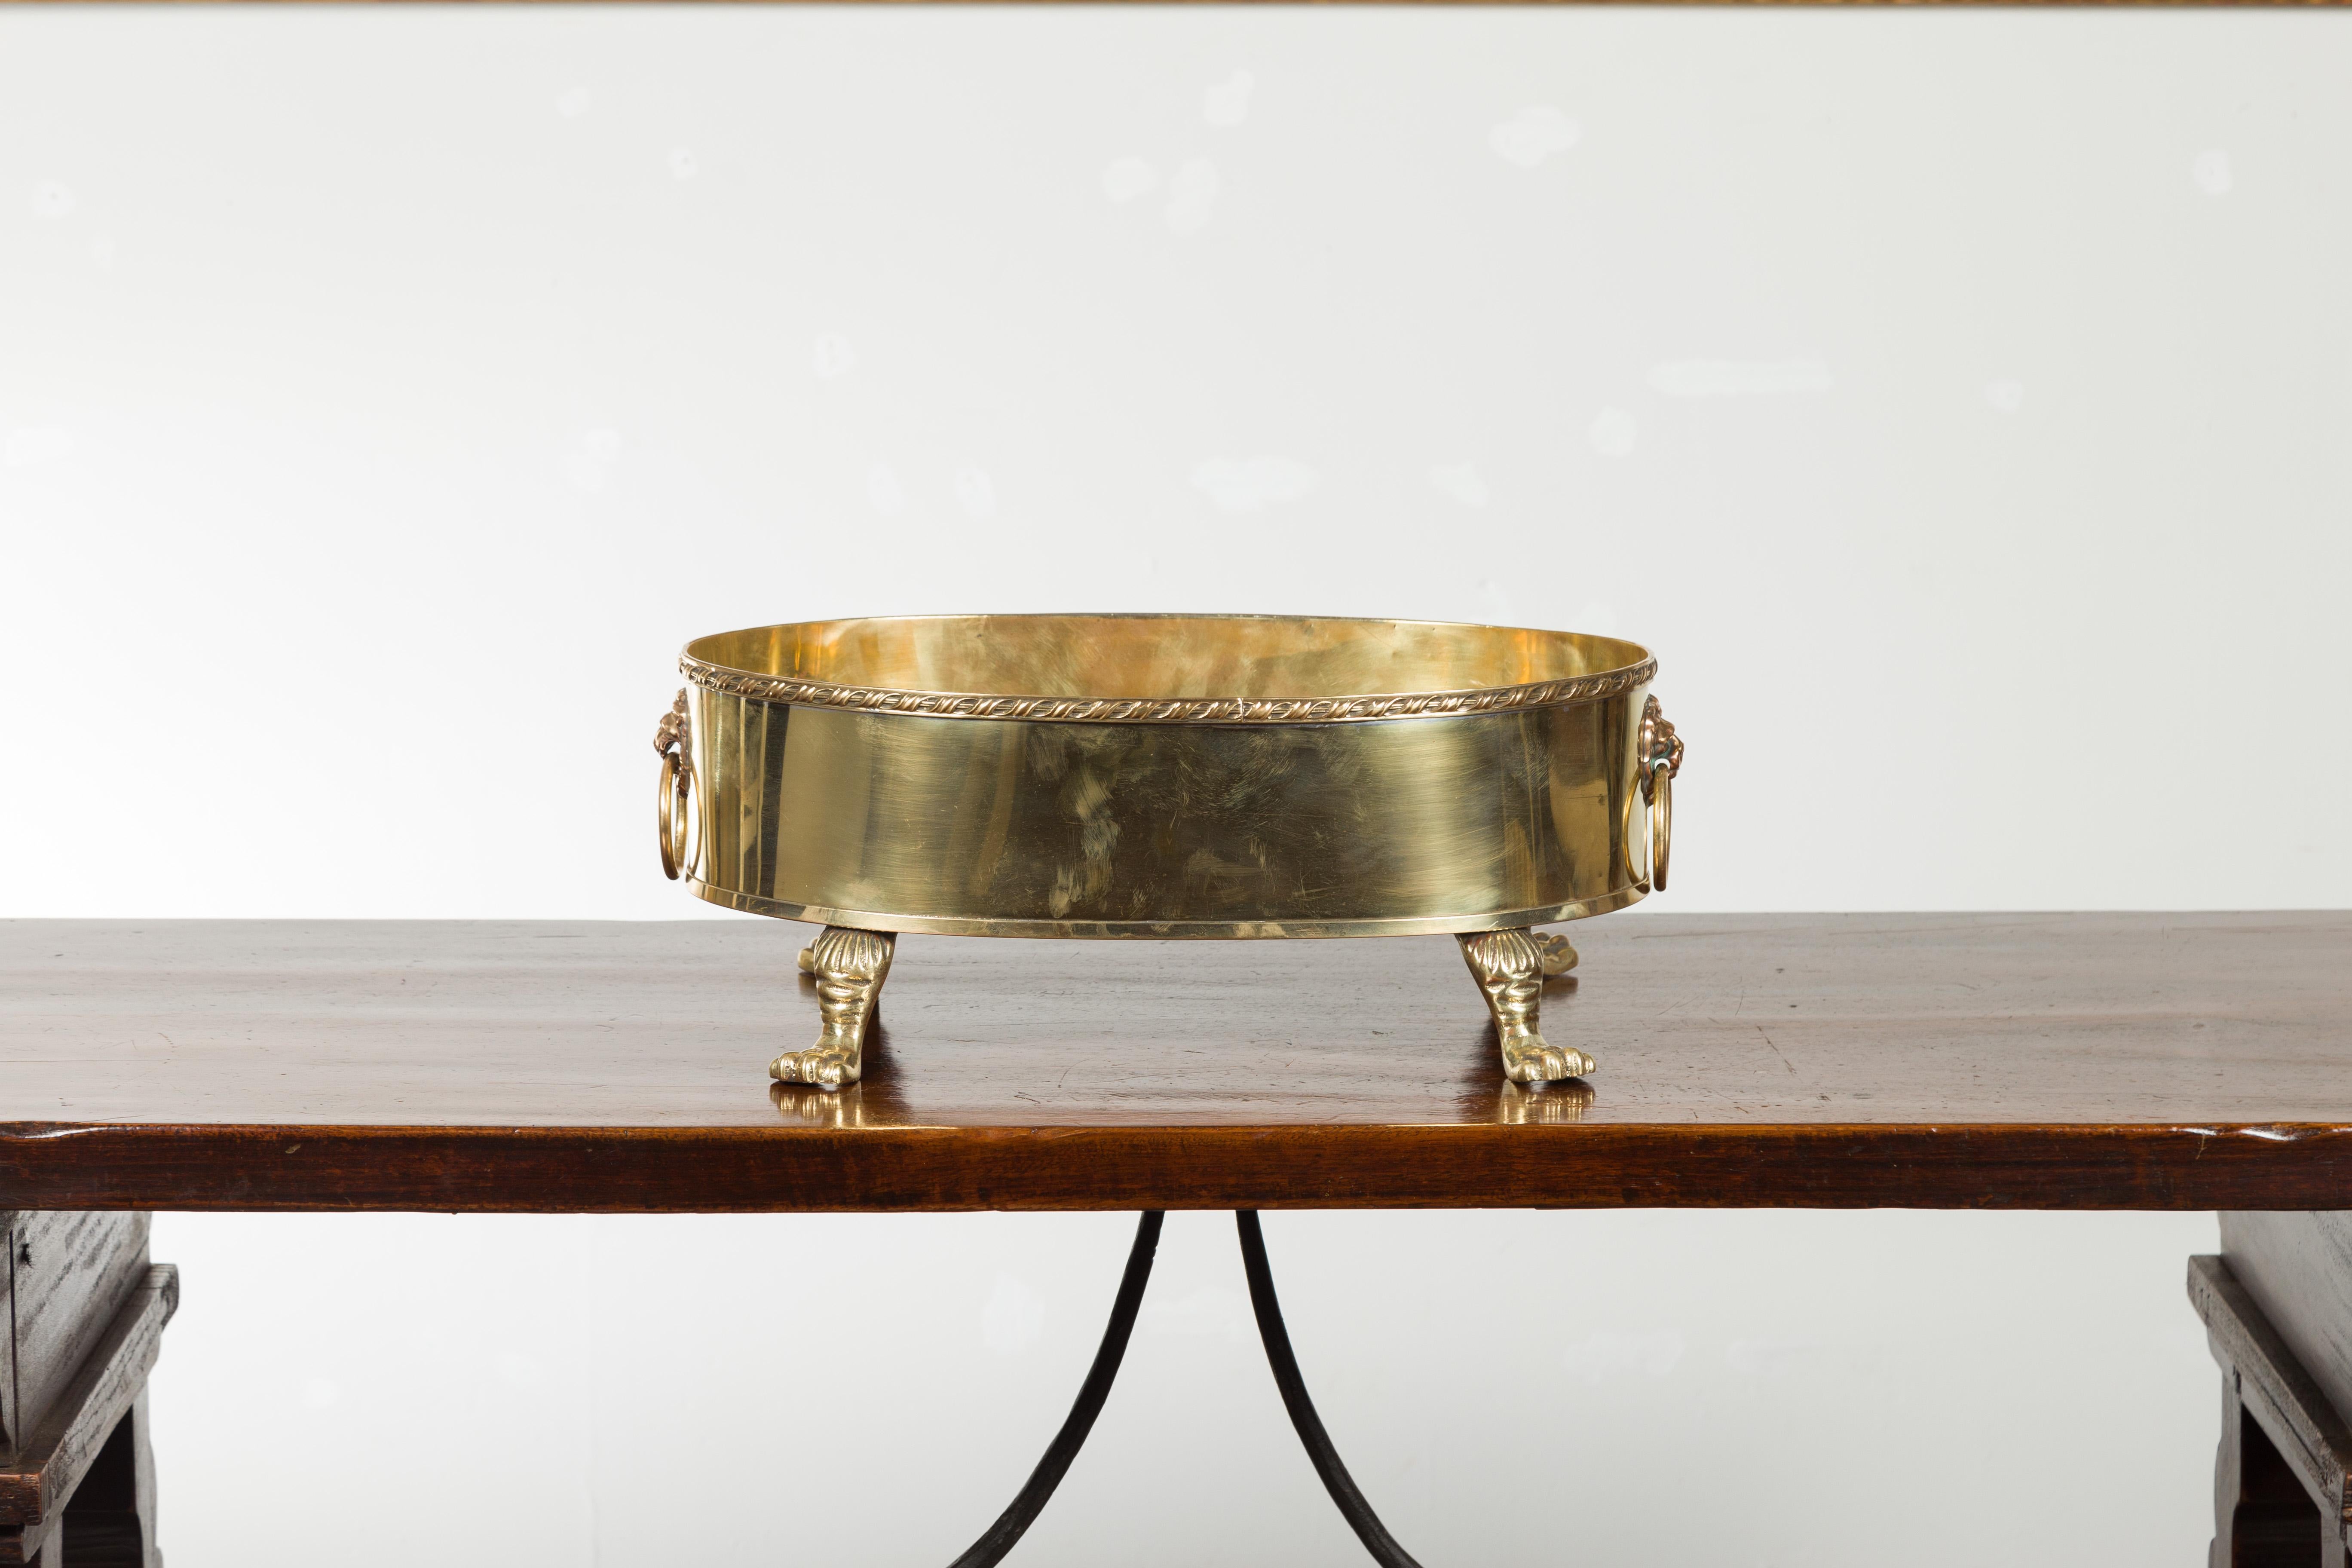 20th Century English Turn of the Century Oval Brass Cachepot with Lion Heads and Paw Feet